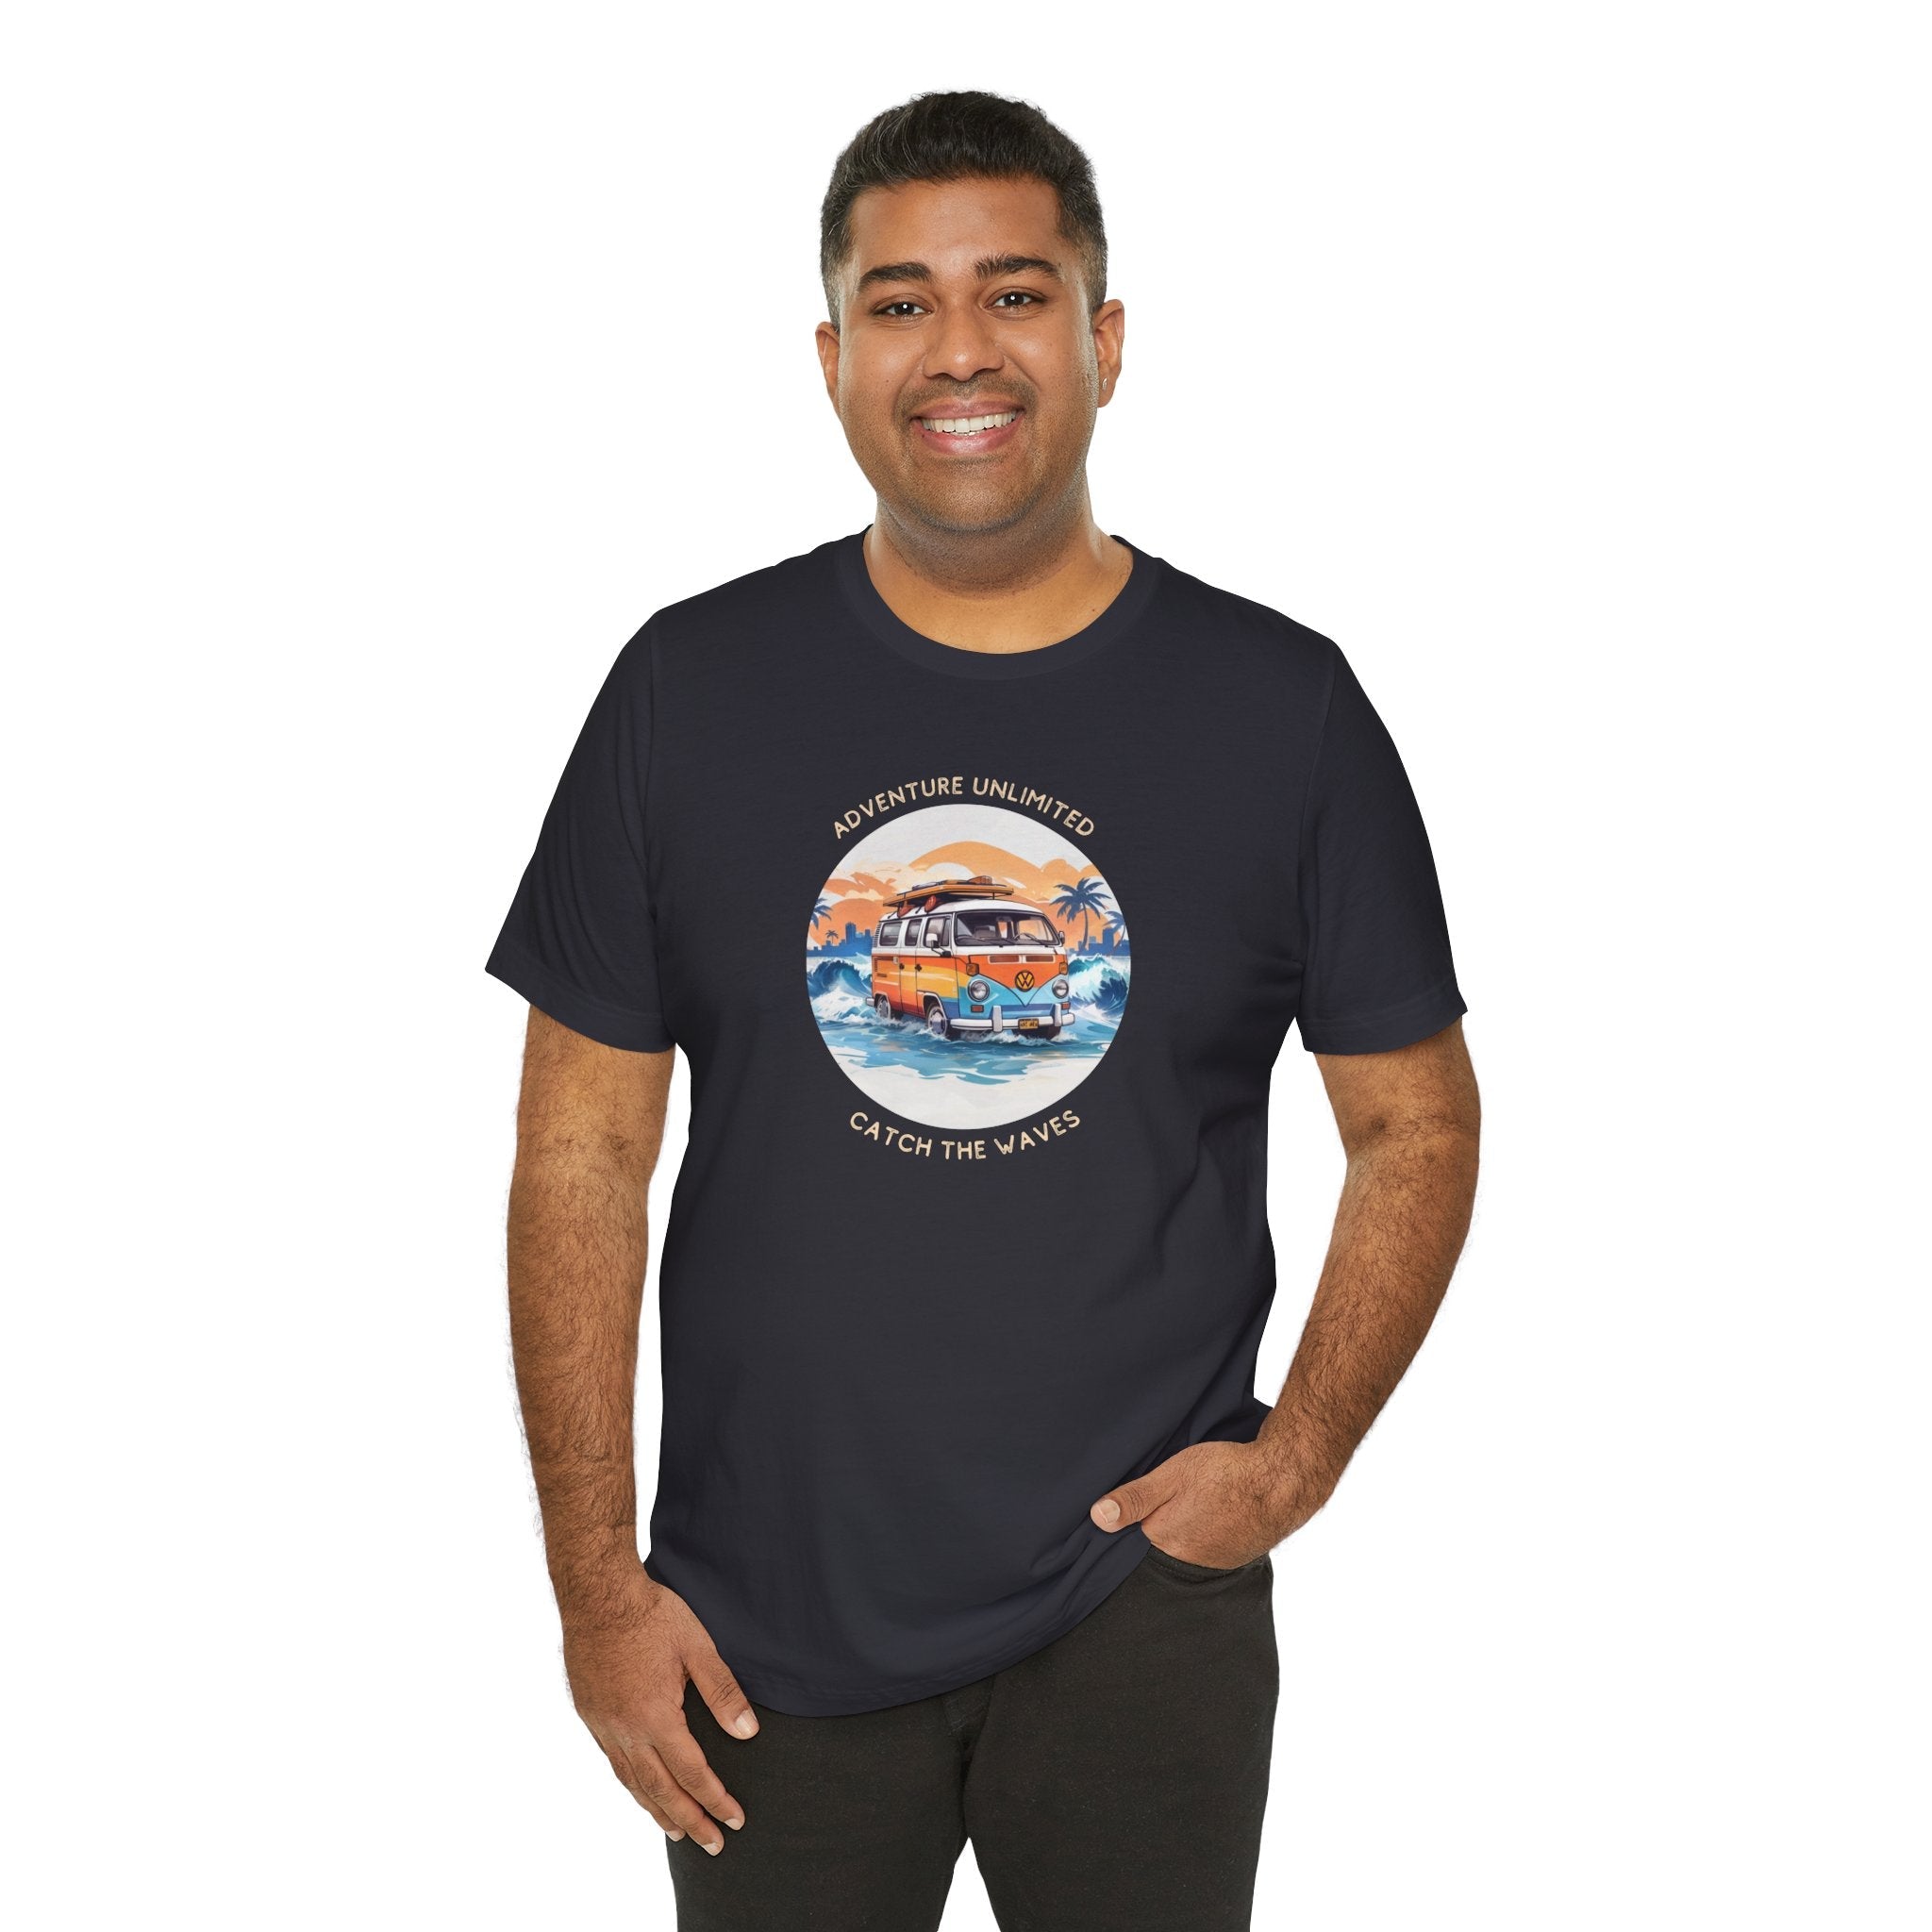 Adventure Unlimited navy t shirt with ’on it’ printed - Unisex Jersey Short Sleeve Tee